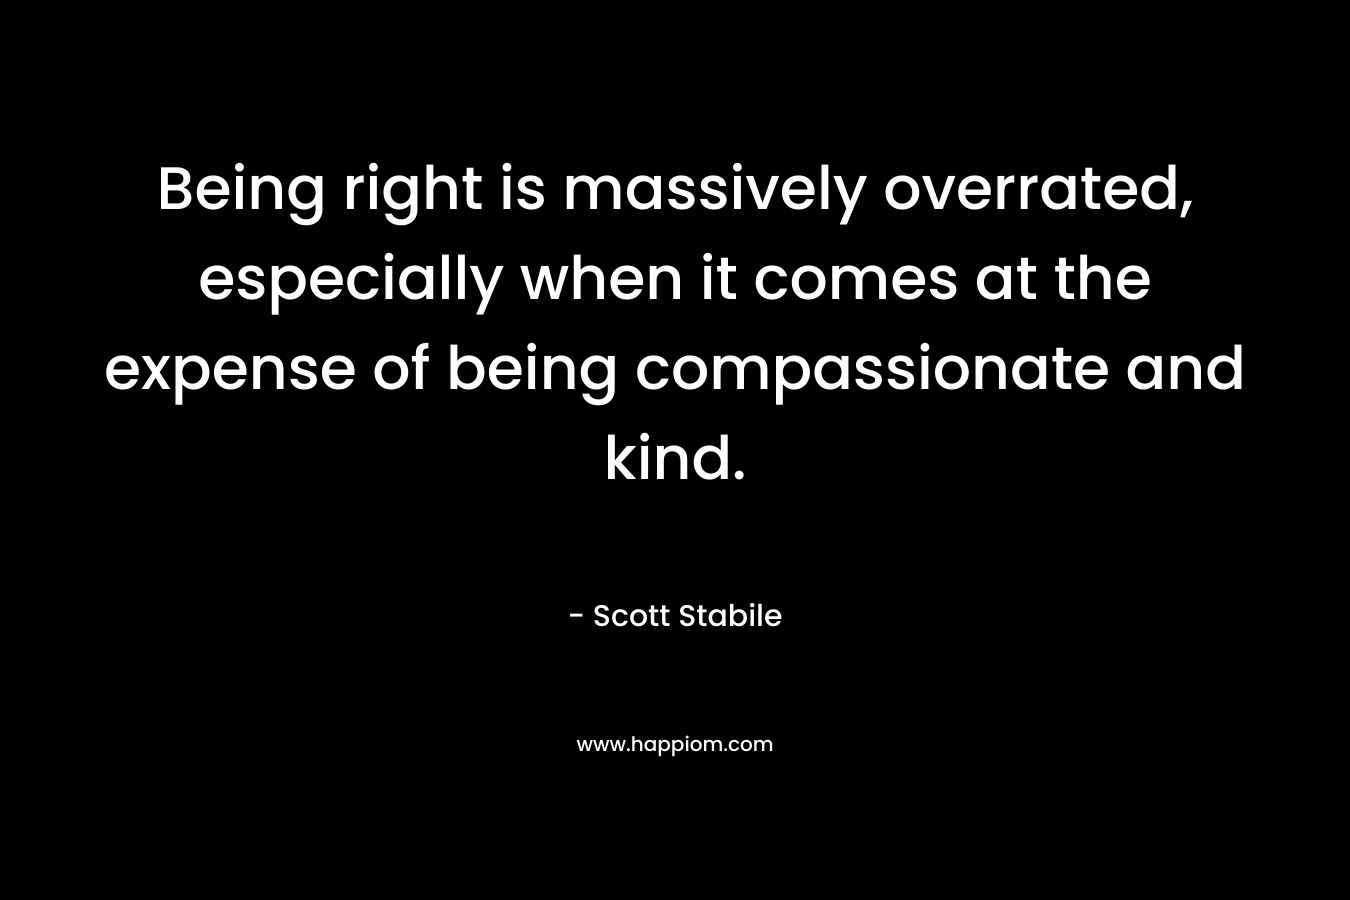 Being right is massively overrated, especially when it comes at the expense of being compassionate and kind.